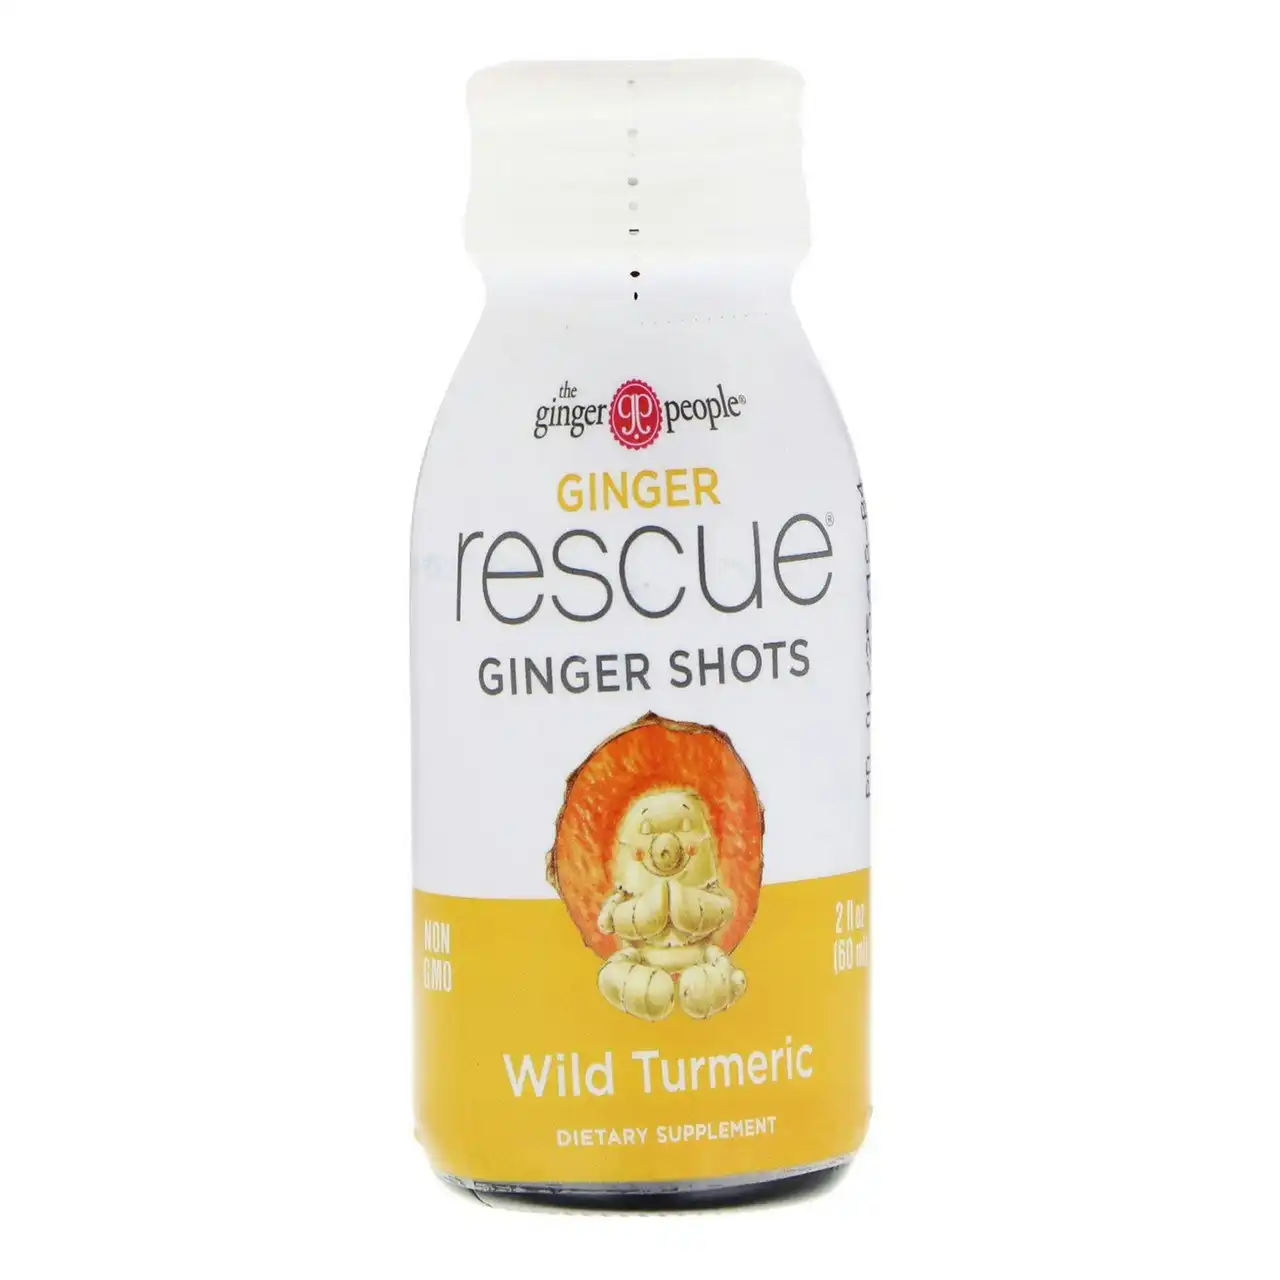 The Ginger People Ginger Rescue Ginger Shot Wild Turmeric 60ml